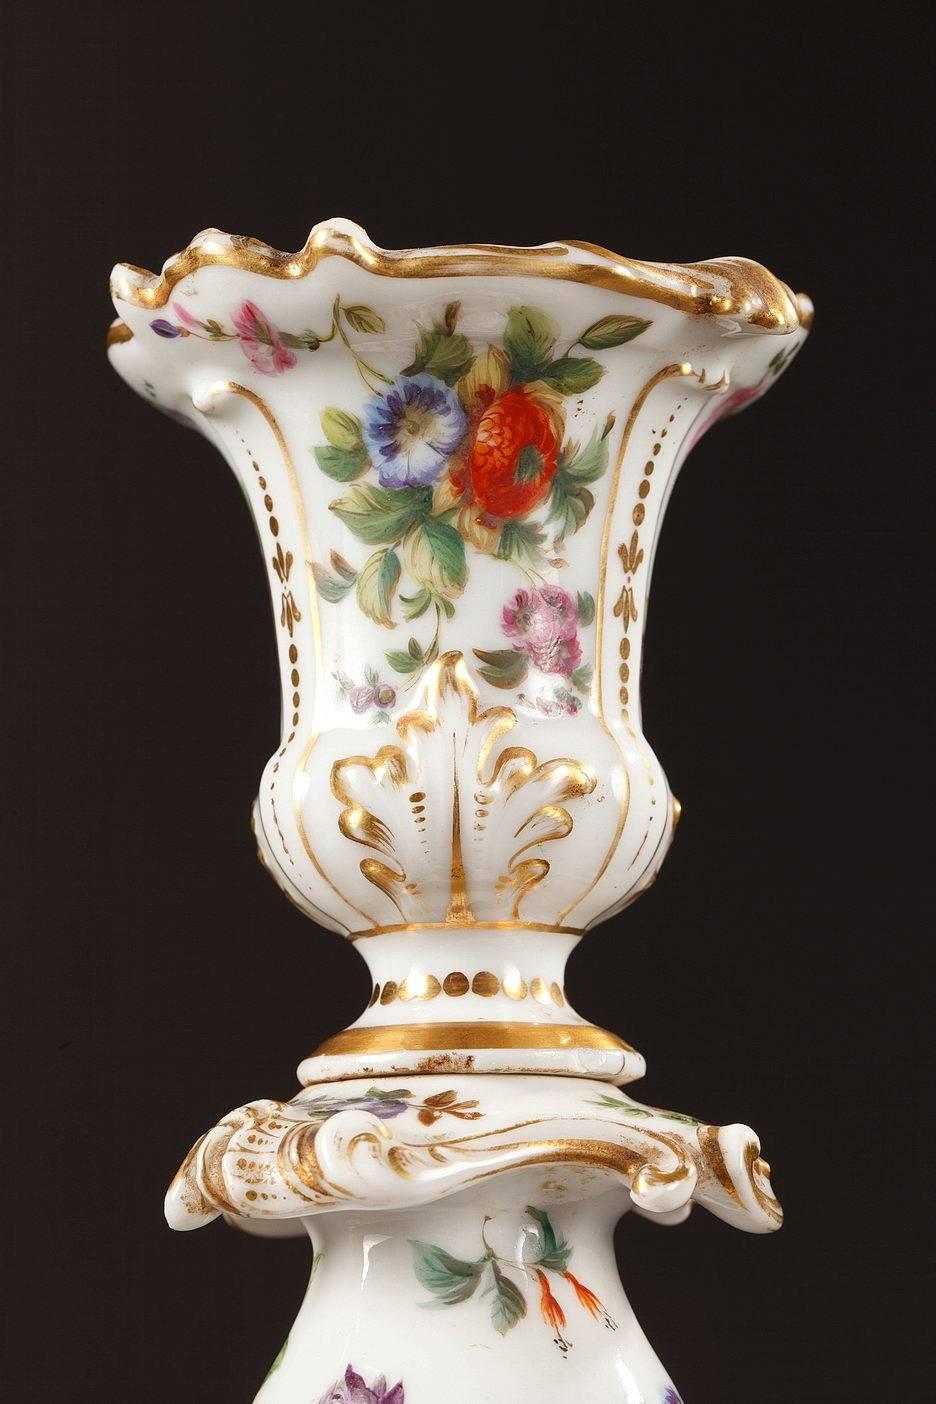 Enameled Mid-19th Century Pair of Porcelain Candlesticks by Jacob Petit